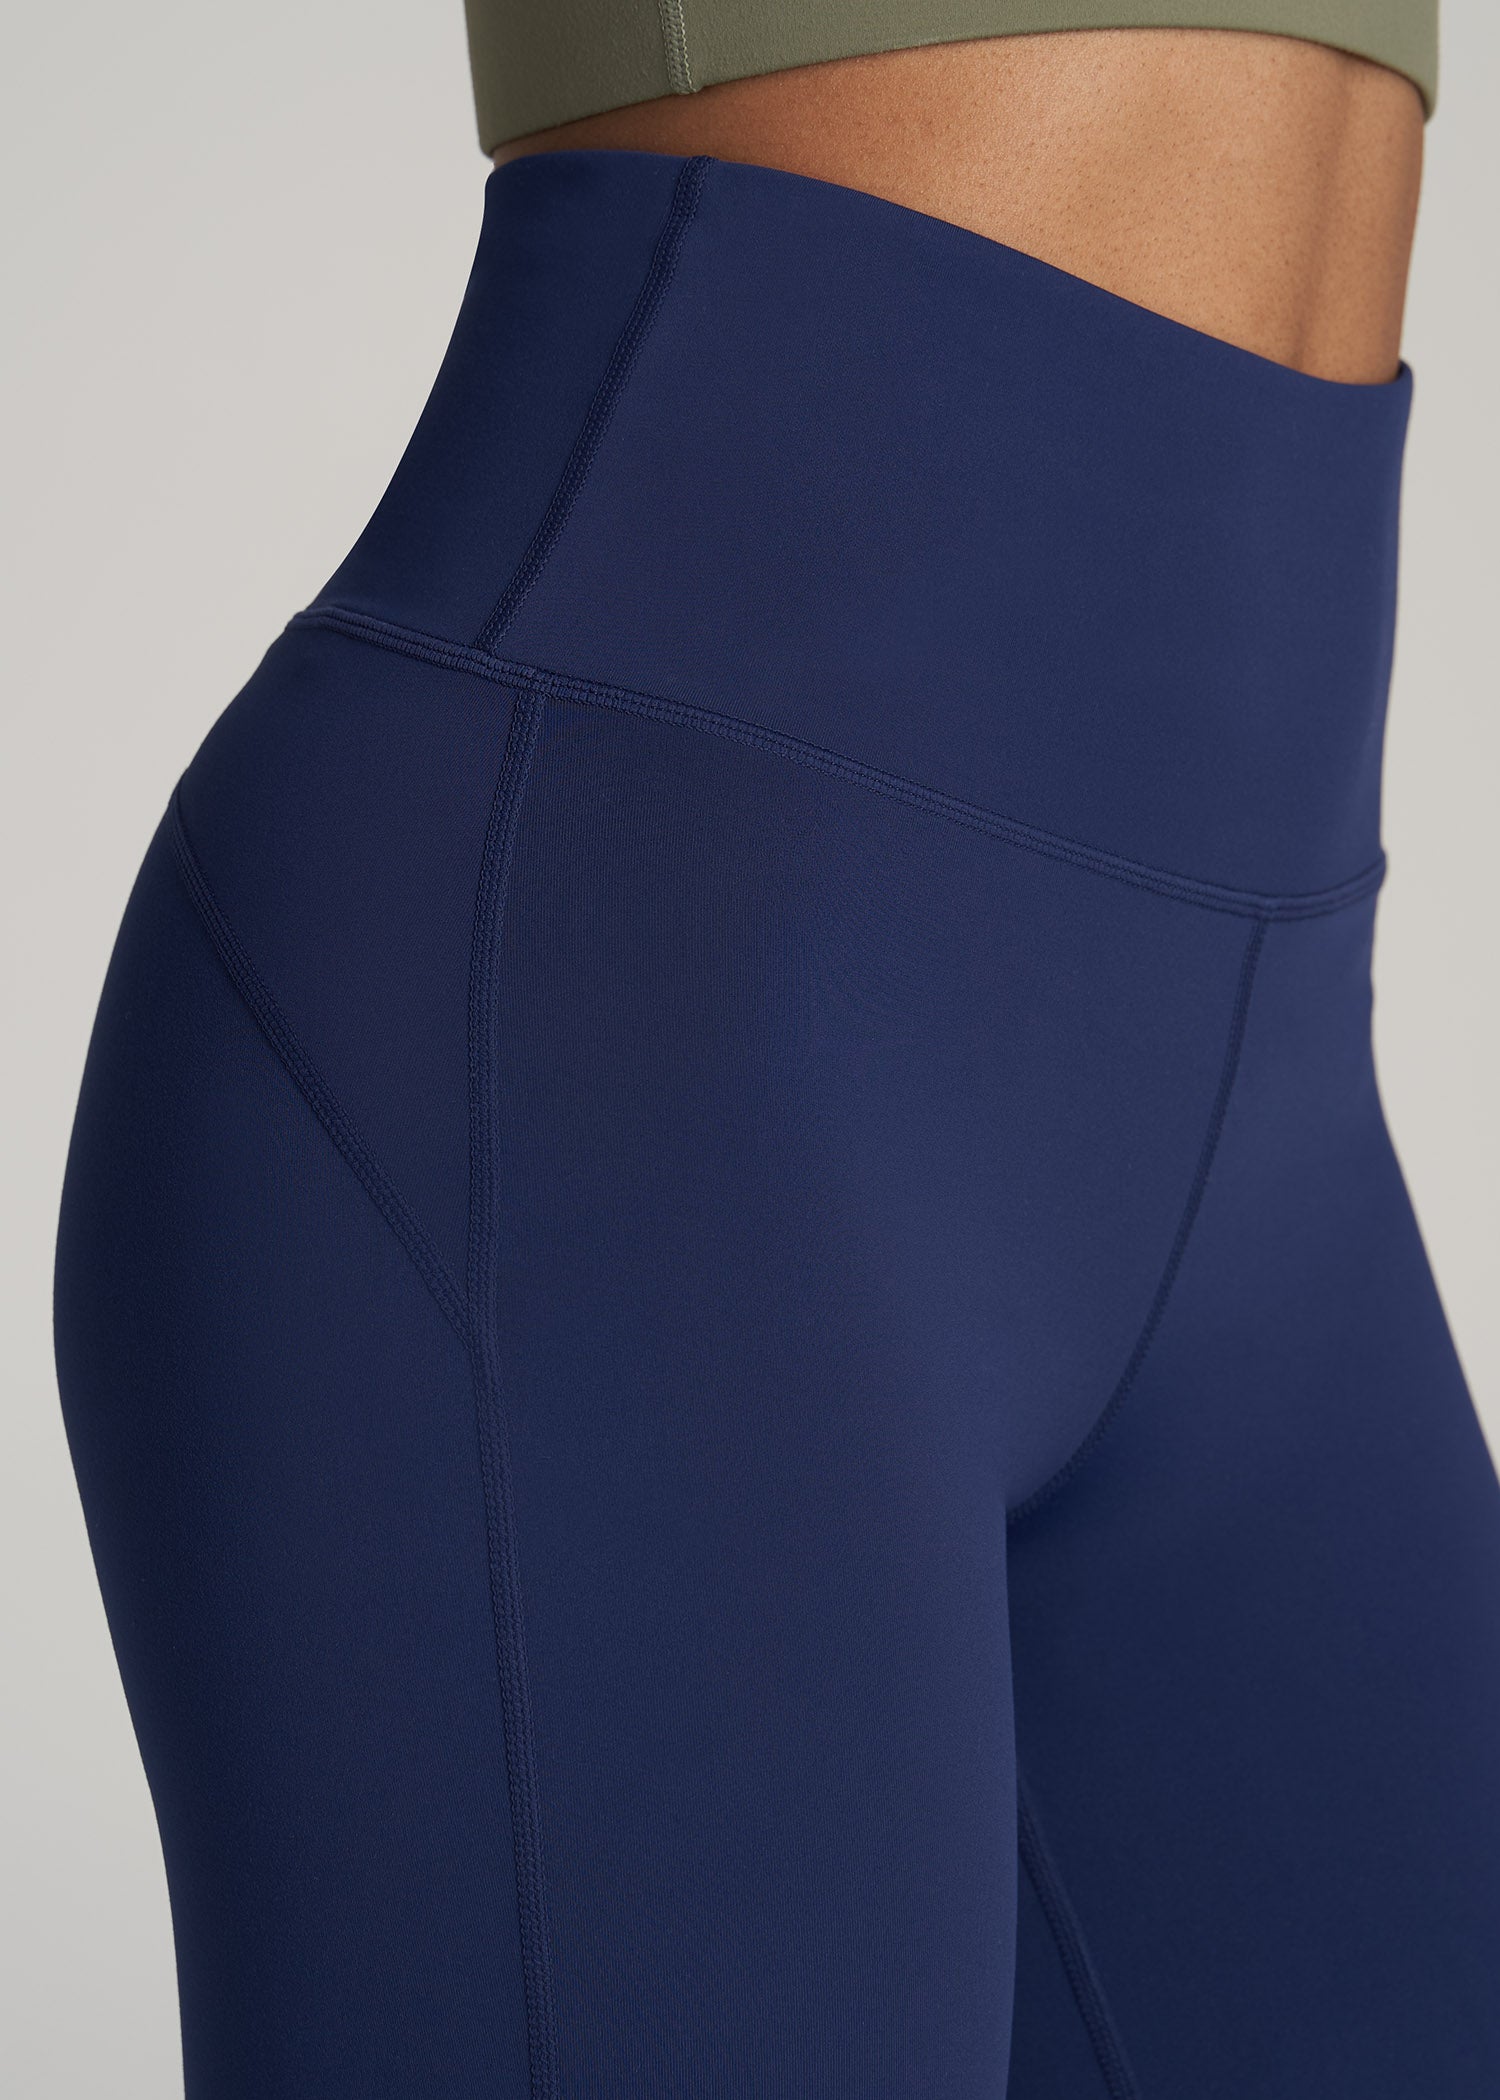 Balance Collection Easy Ankle Yoga Leggings, Women's Size XL, Blue NEW MSRP  $60